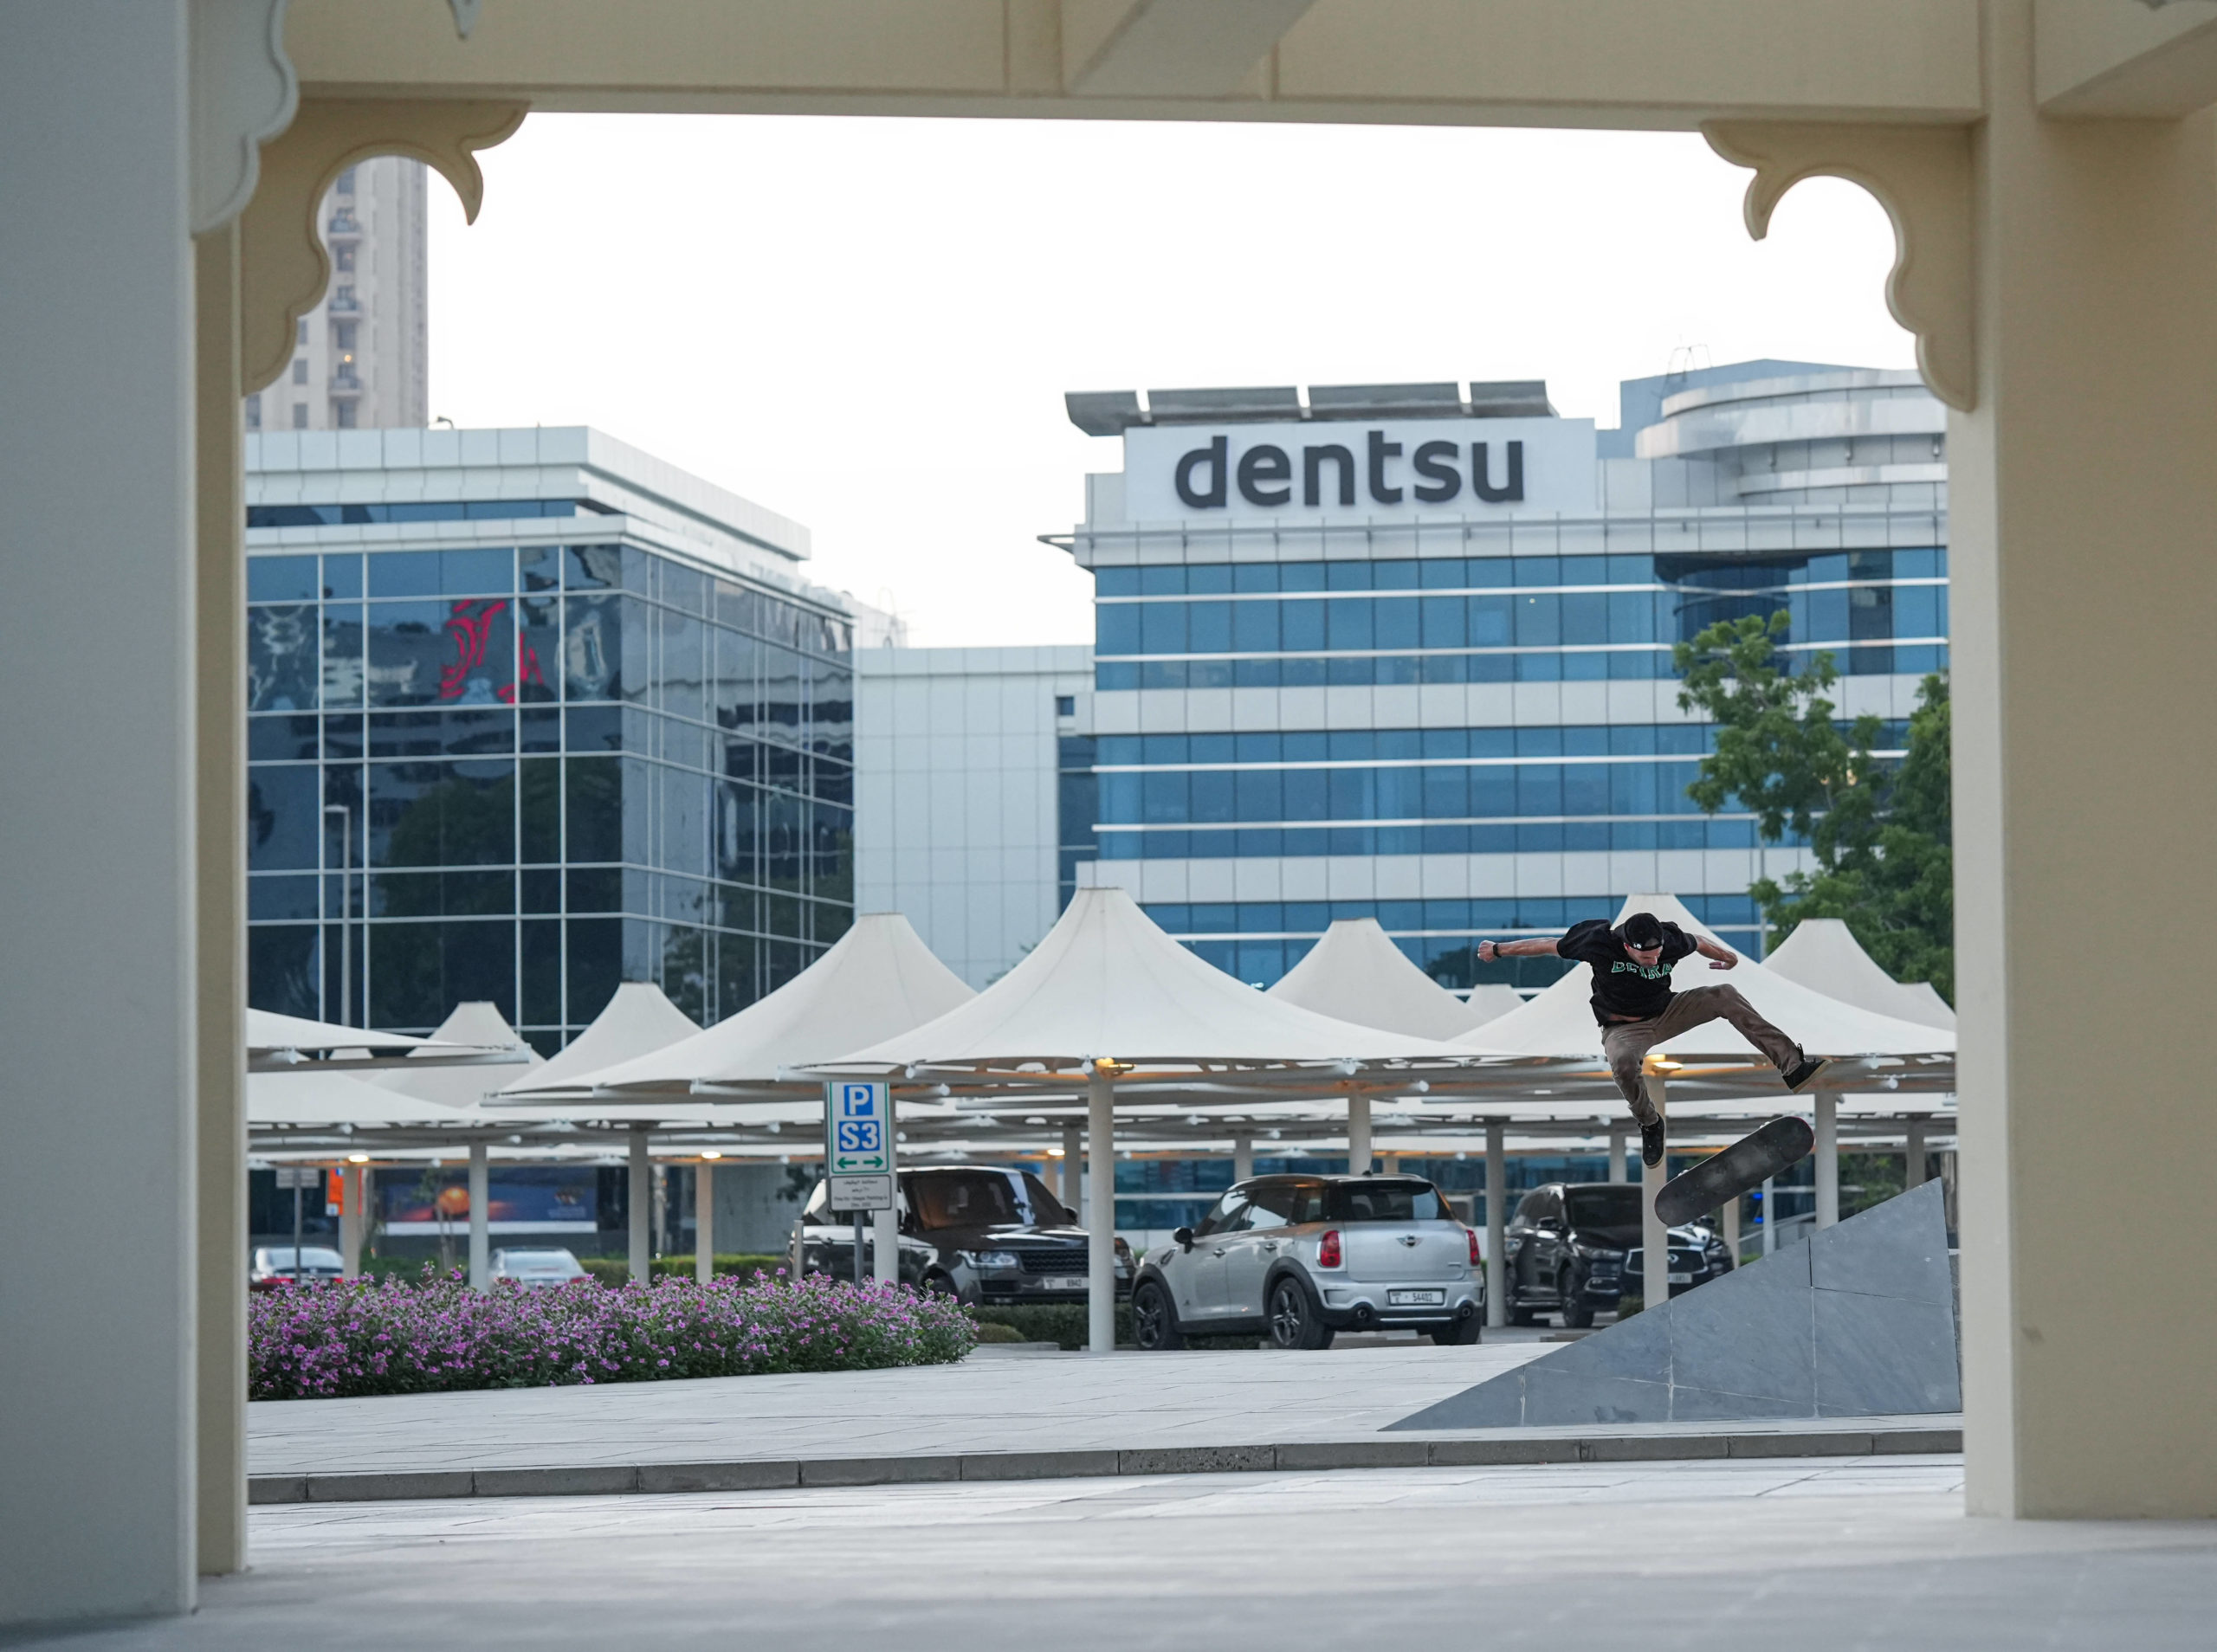 Light_myself, kickflip to fakie in media city, photo by Jim Bacalso